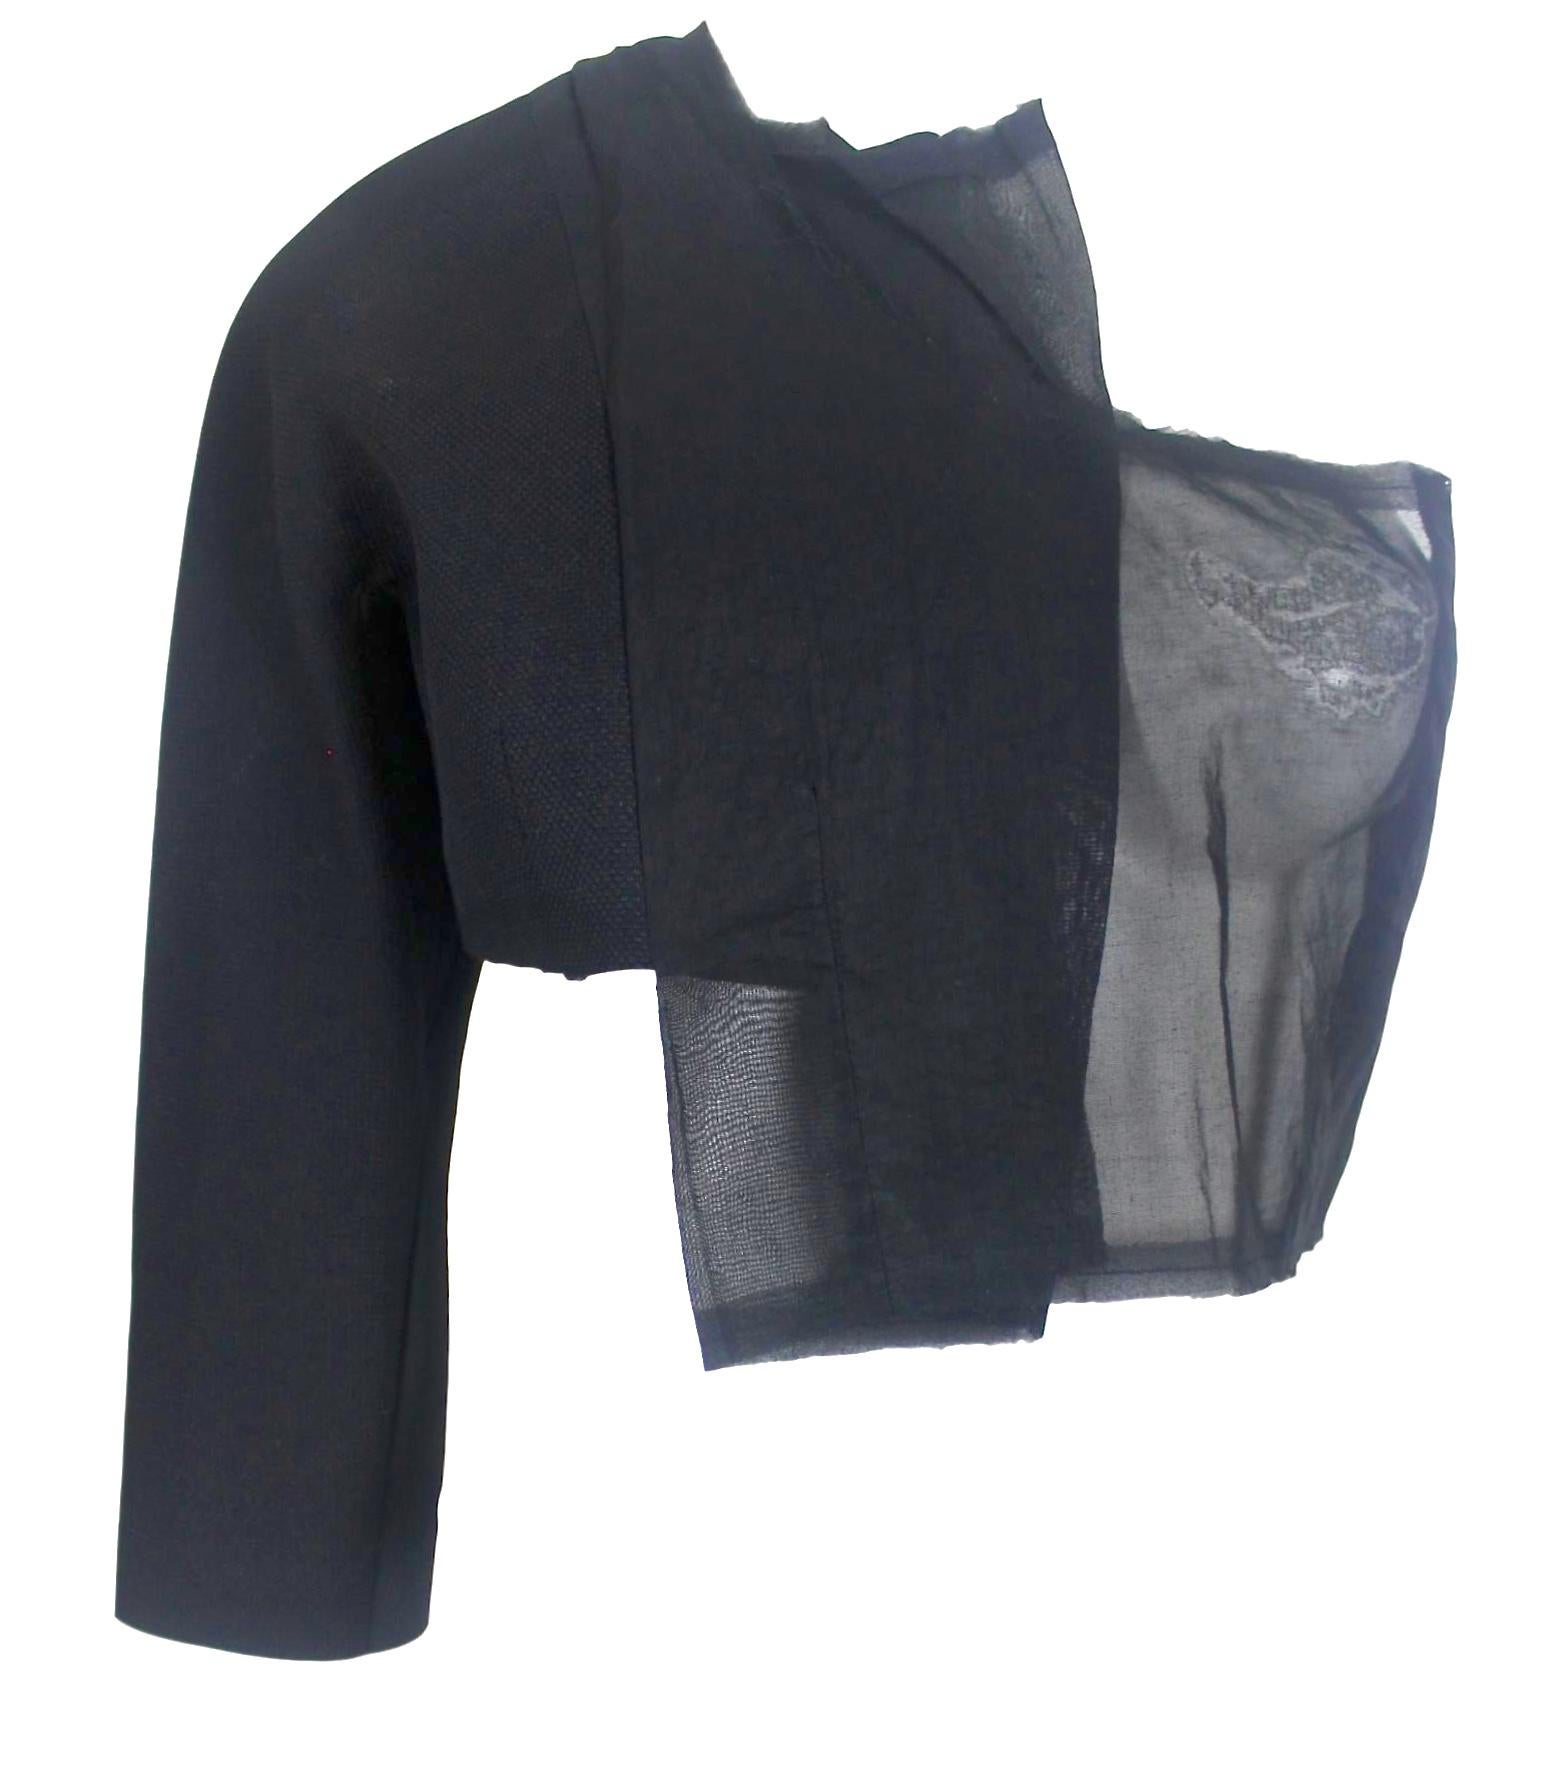 Comme des Garcons AD 1999 Single Sleeve Fitted Jacket In Excellent Condition For Sale In Bath, GB